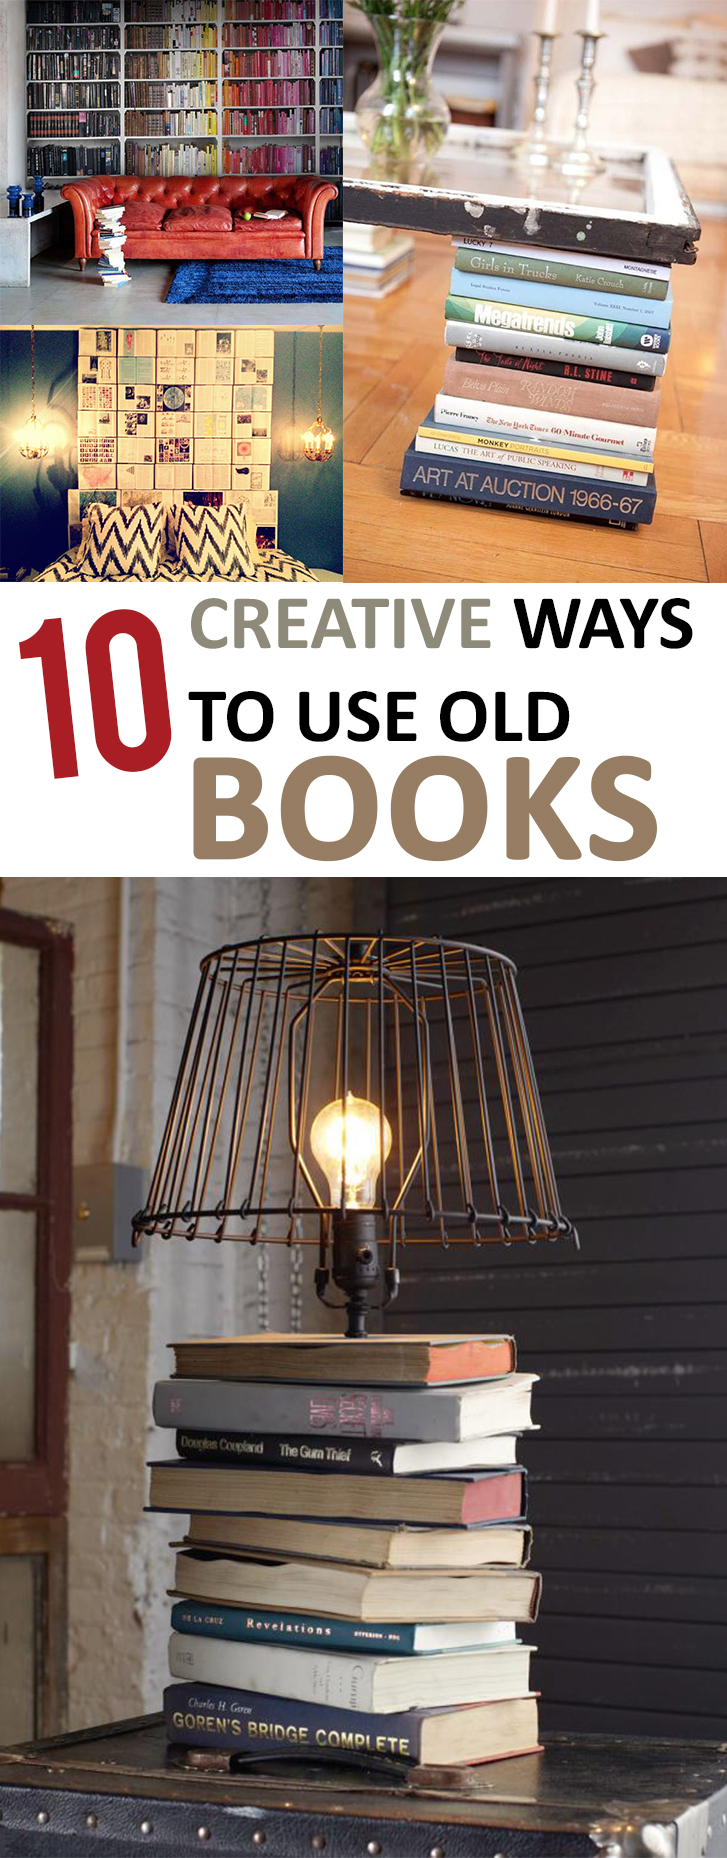 10 Creative Ways to Use Old Books (1)